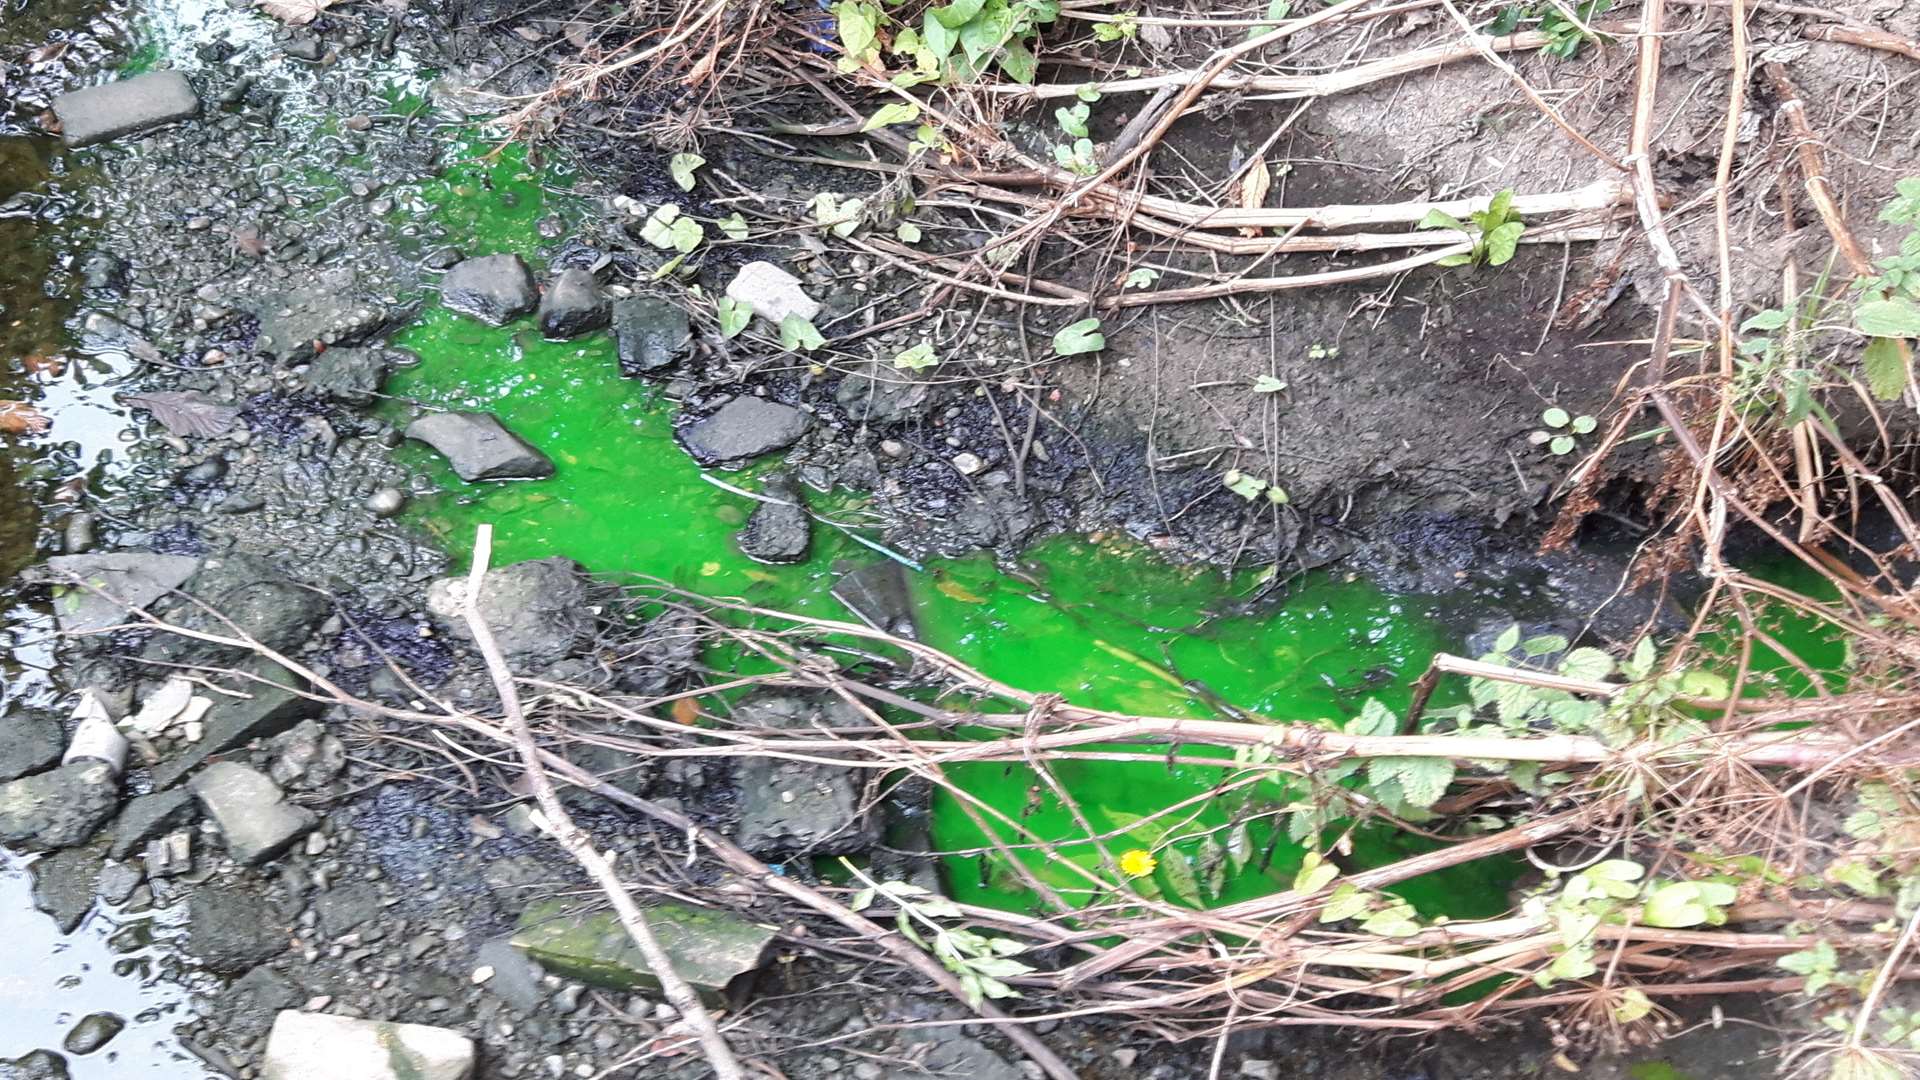 Sewage has been found in Swalecliffe Brook